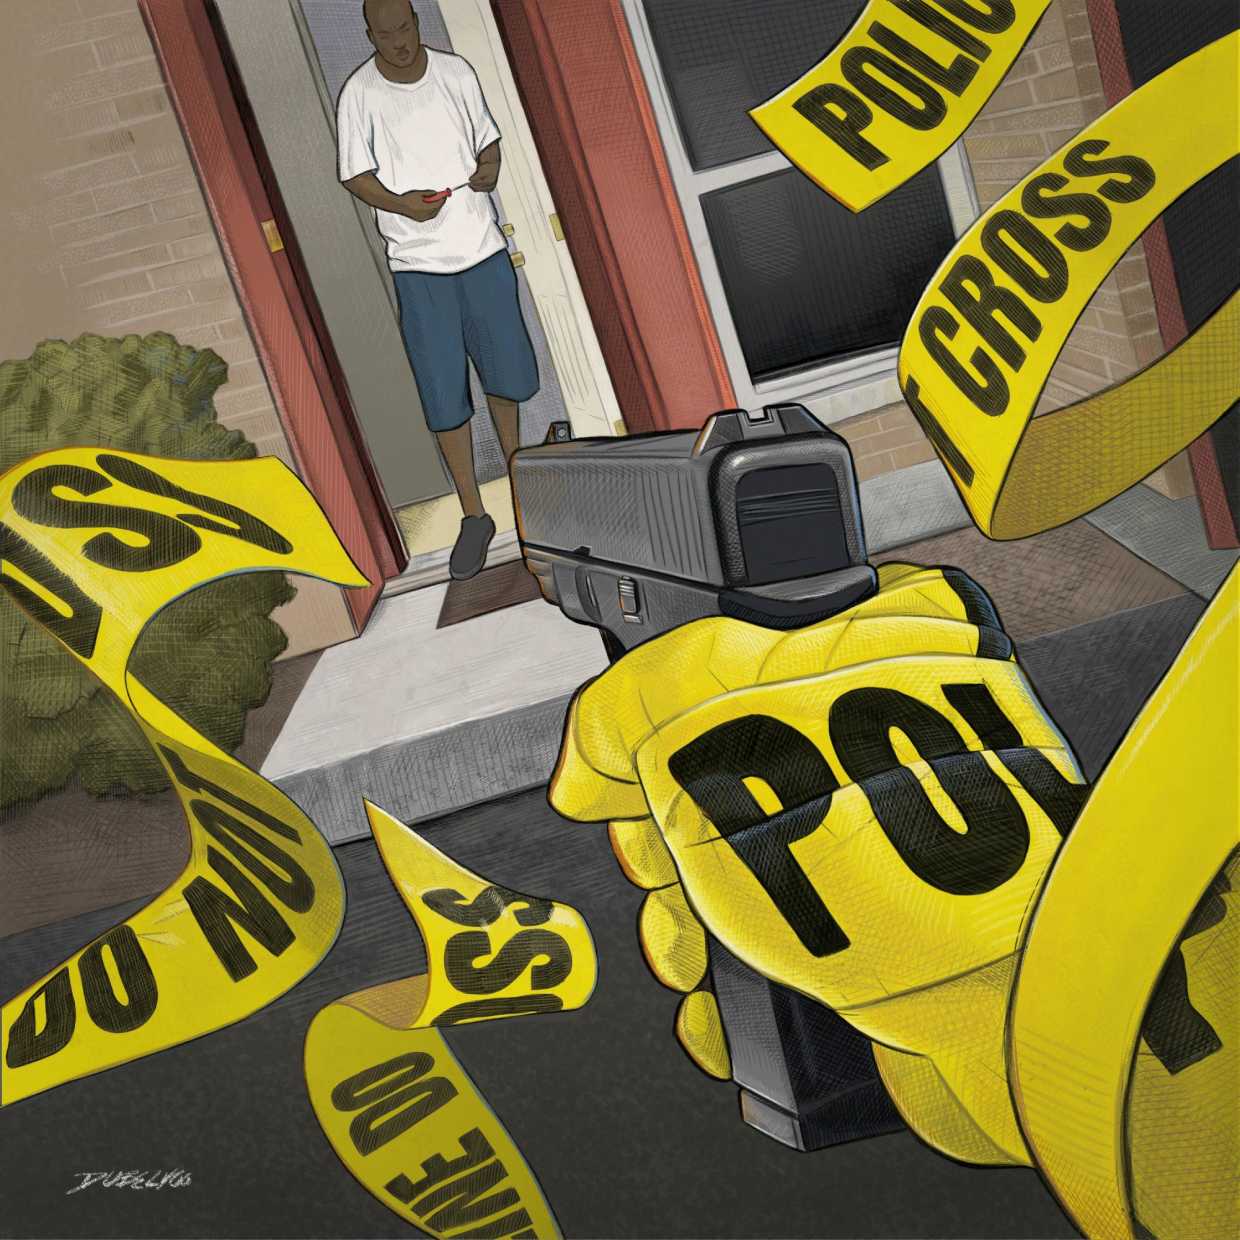 A Black man stands at a doorway casually holding a screwdriver. A hand holding a gun points at him. Yellow police tape wraps the hand holding the gun, with loose yellow tape flowing in the air.